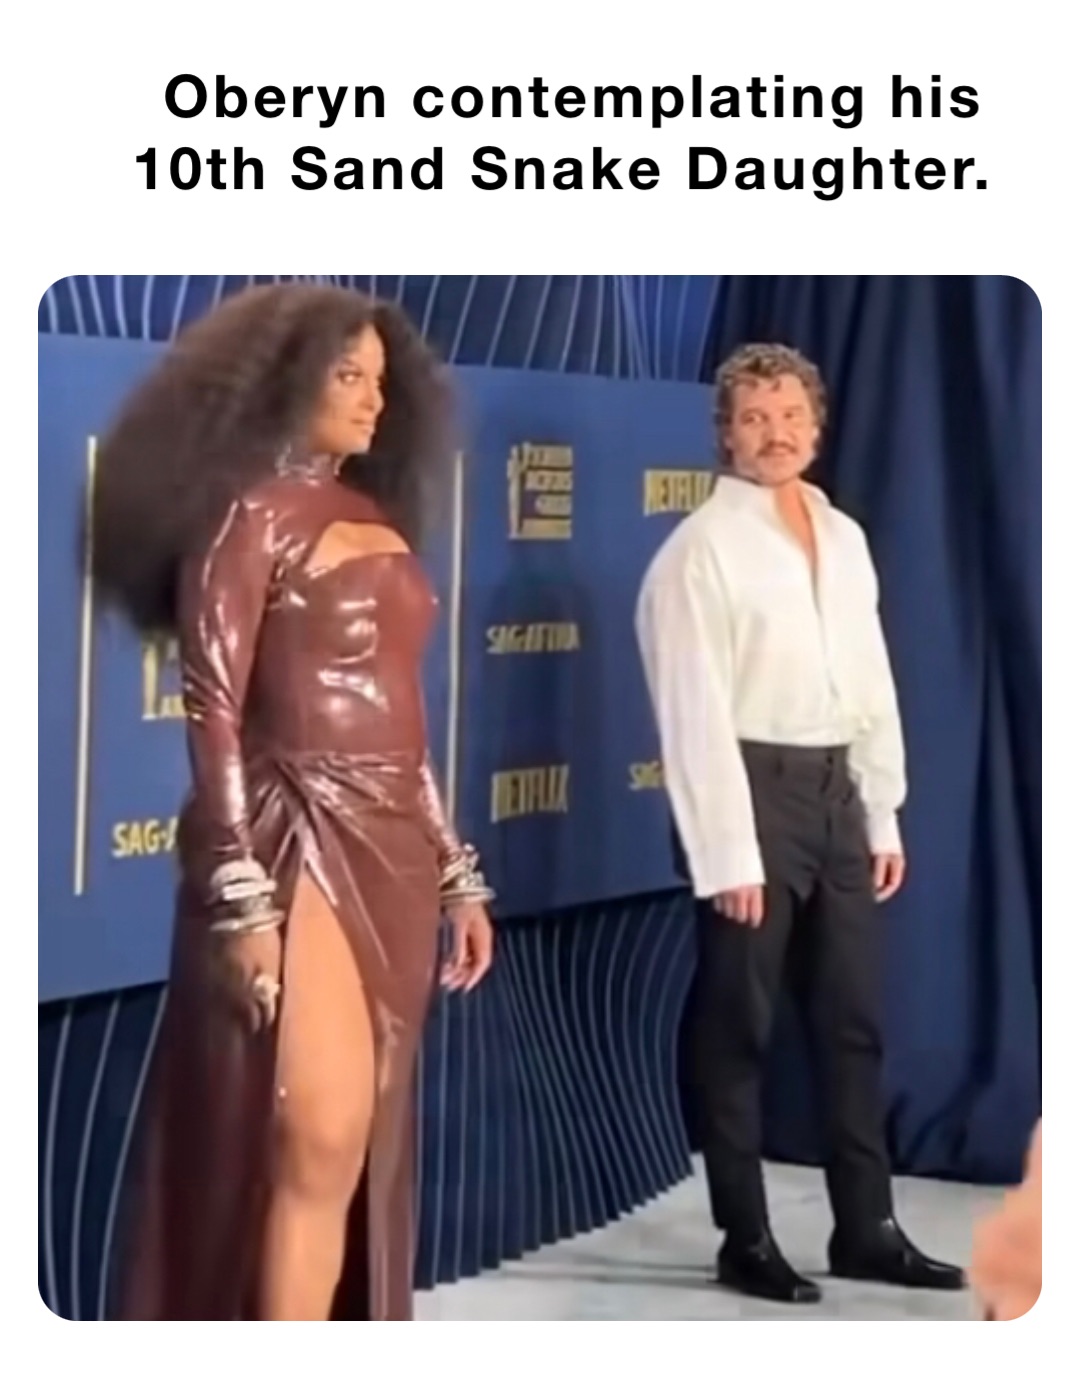 Oberyn contemplating his 
10th Sand Snake Daughter.